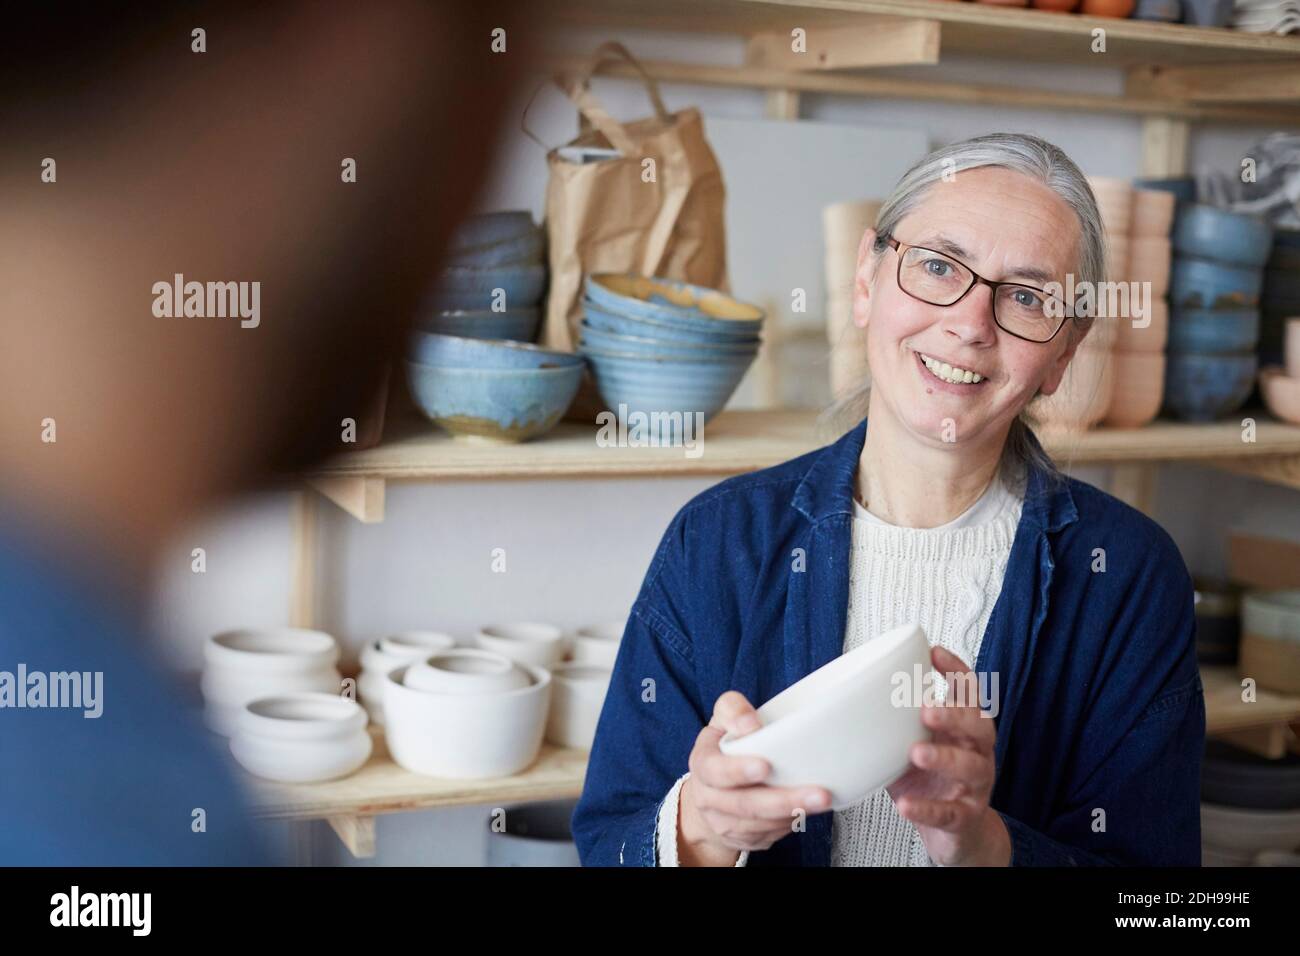 Smiling mature woman discussing with man over bowl in pottery class Stock Photo